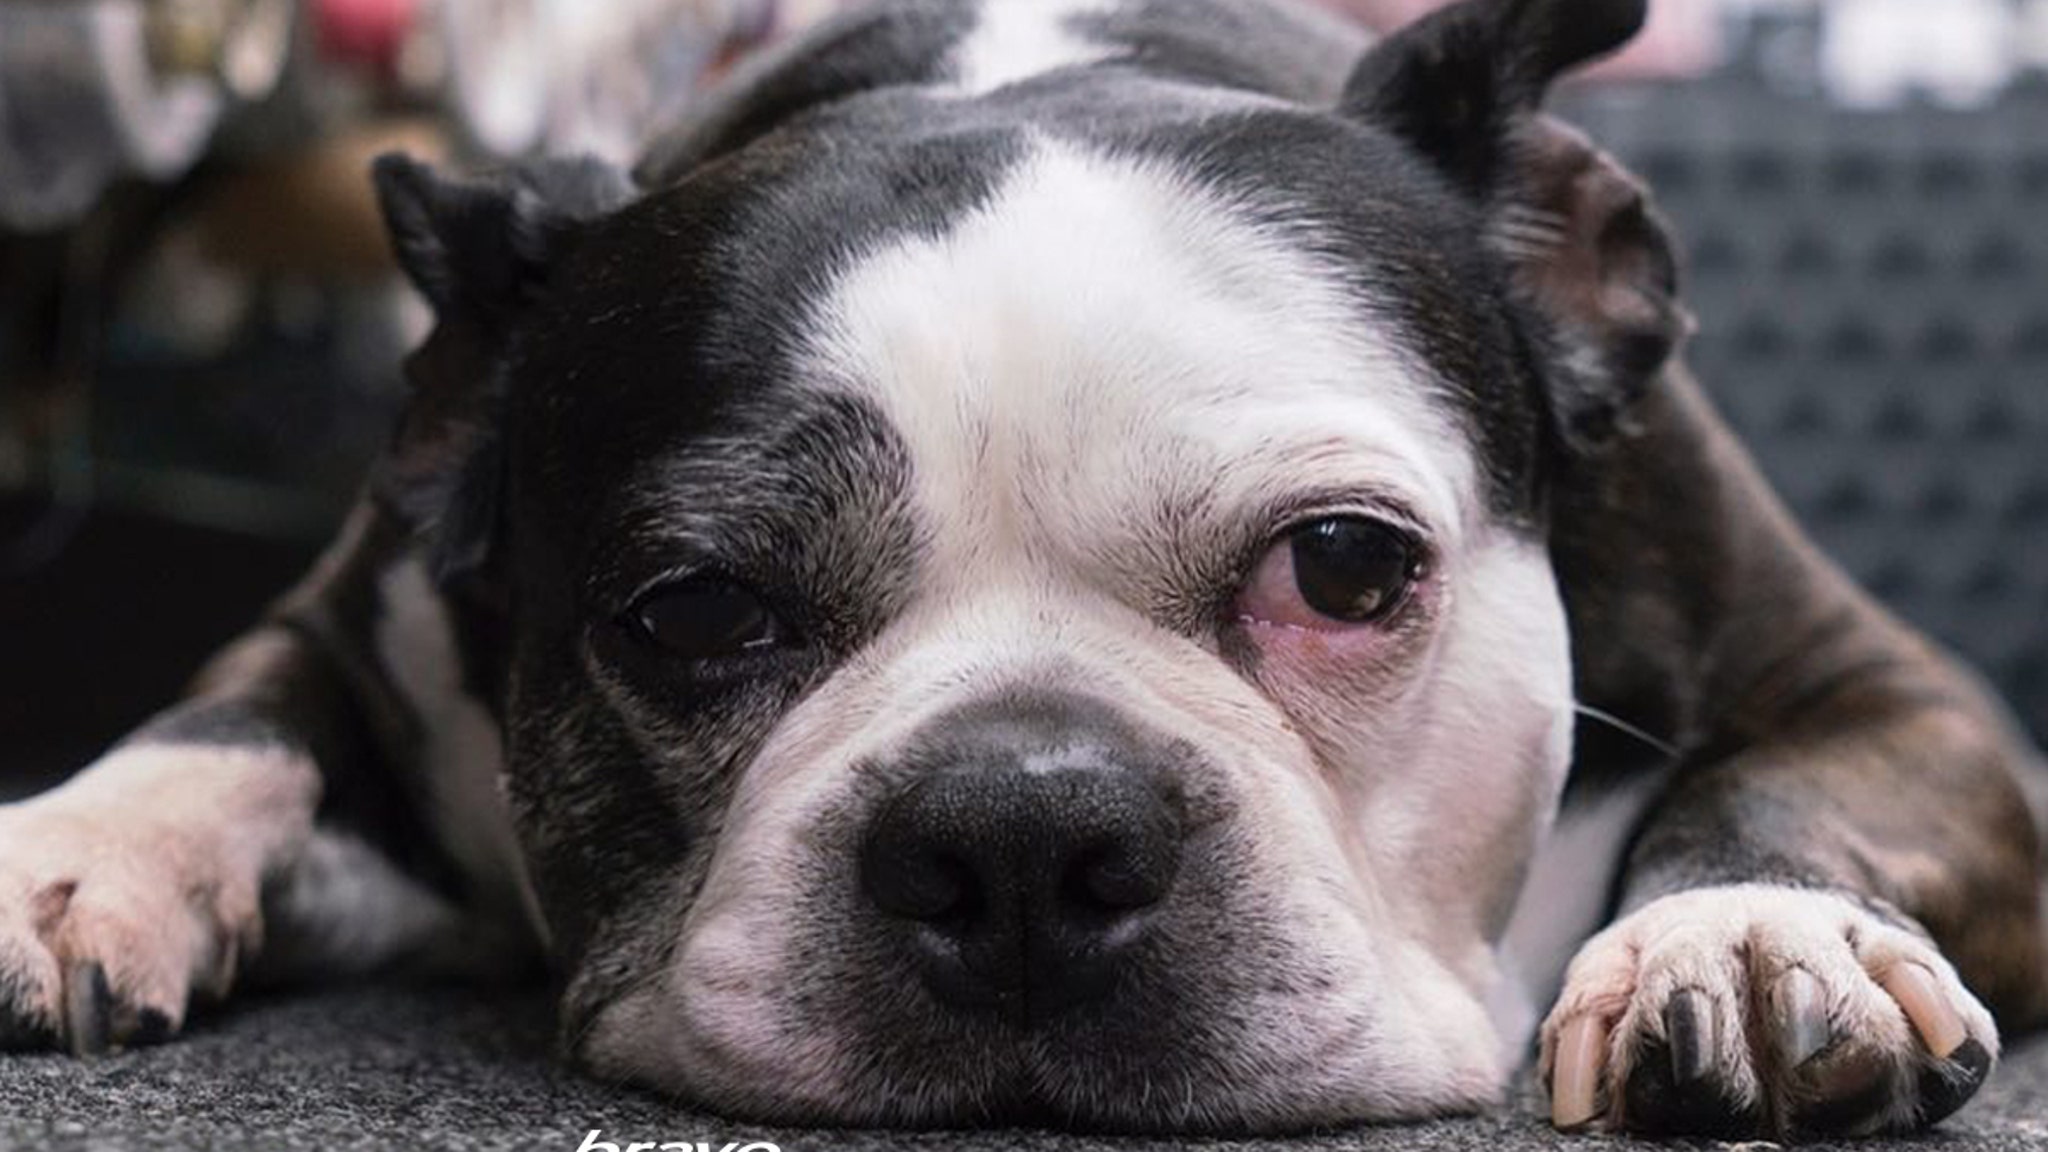 ‘Project Runway’s’ Swatch The Dog Dead At 15